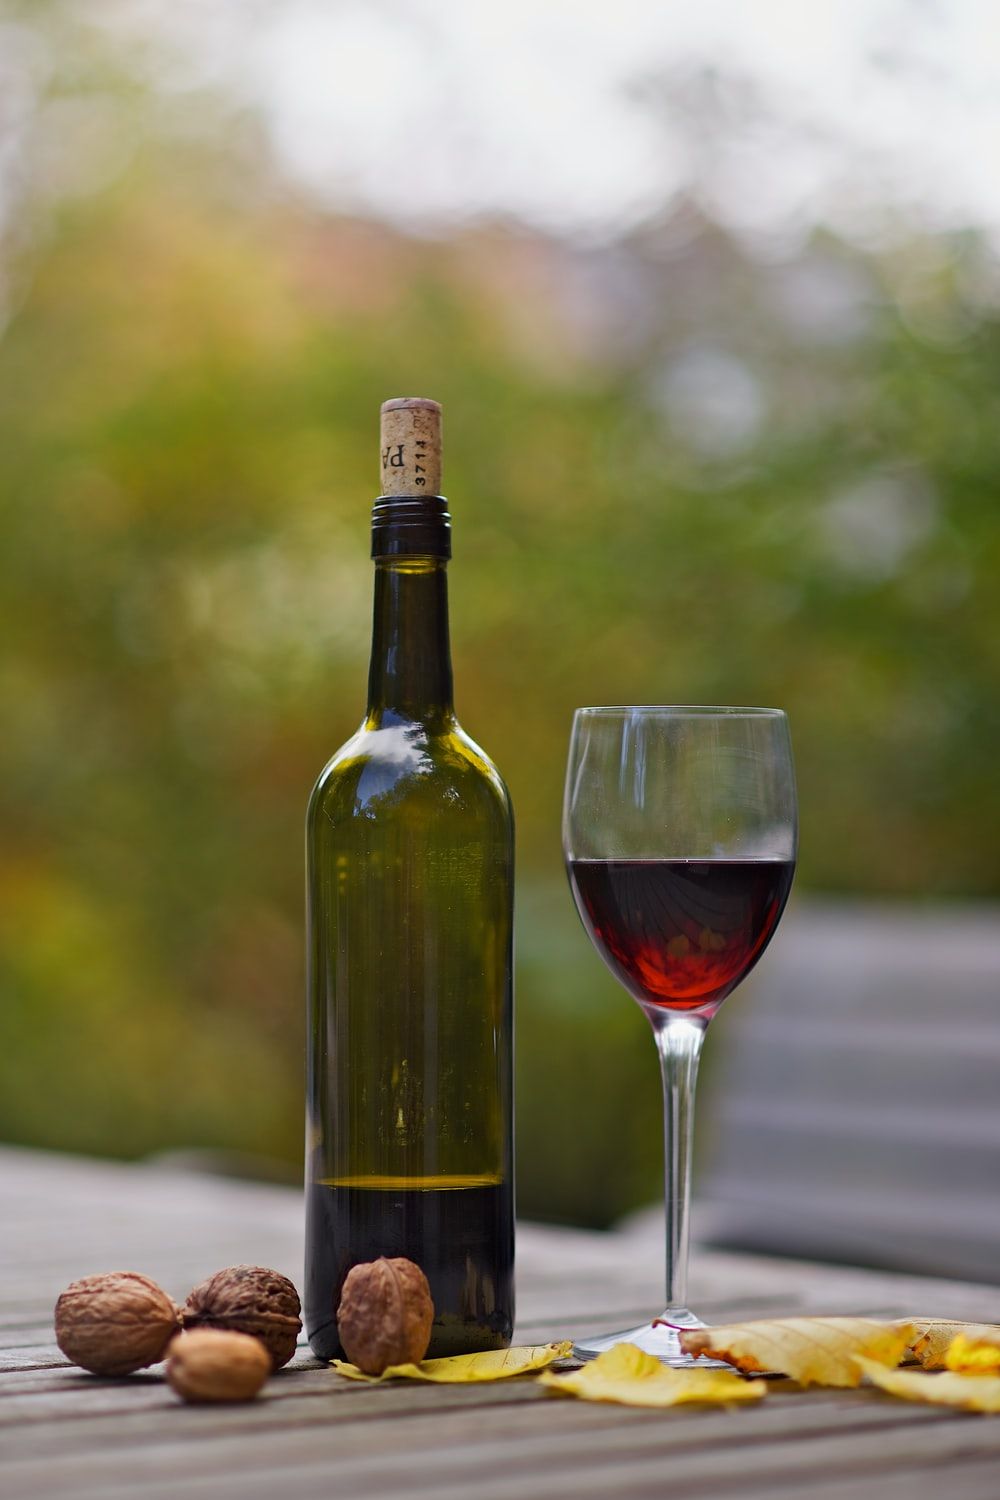 Wine Bottle Picture [HD]. Download Free Image